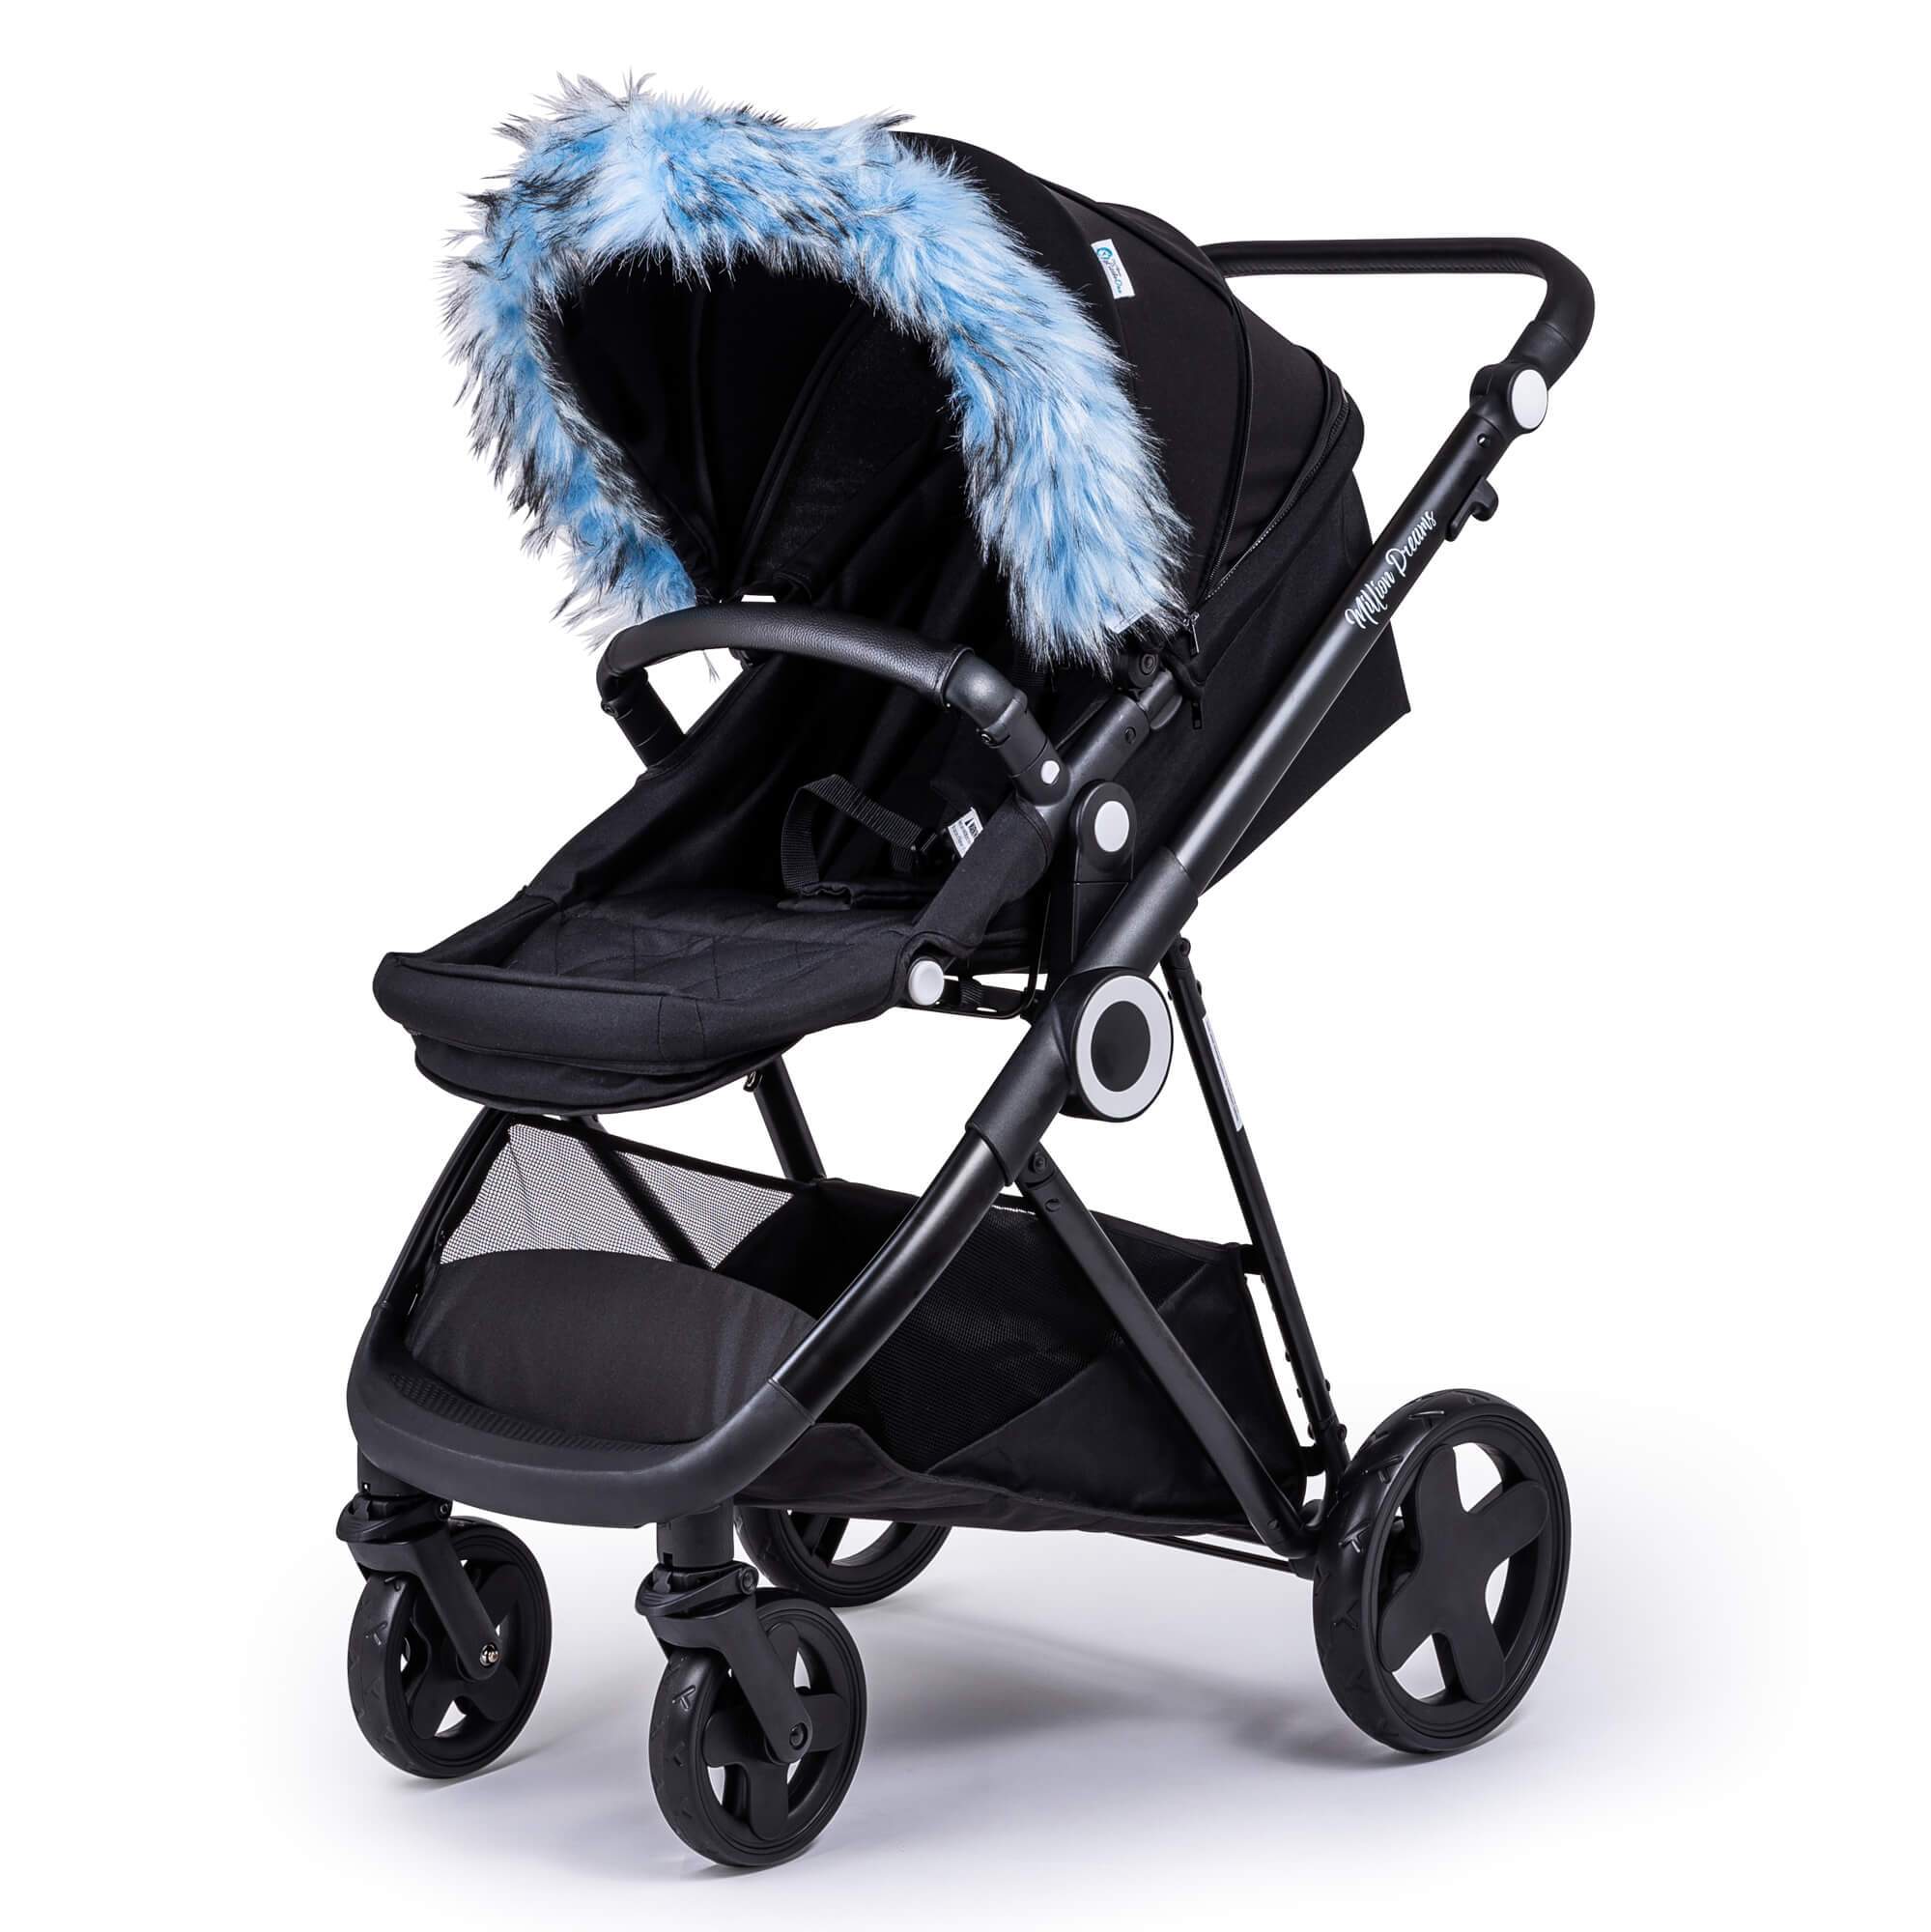 Pram Fur Hood Trim Attachment for Pushchair Compatible with Uppababy - Light Blue / Fits All Models | For Your Little One